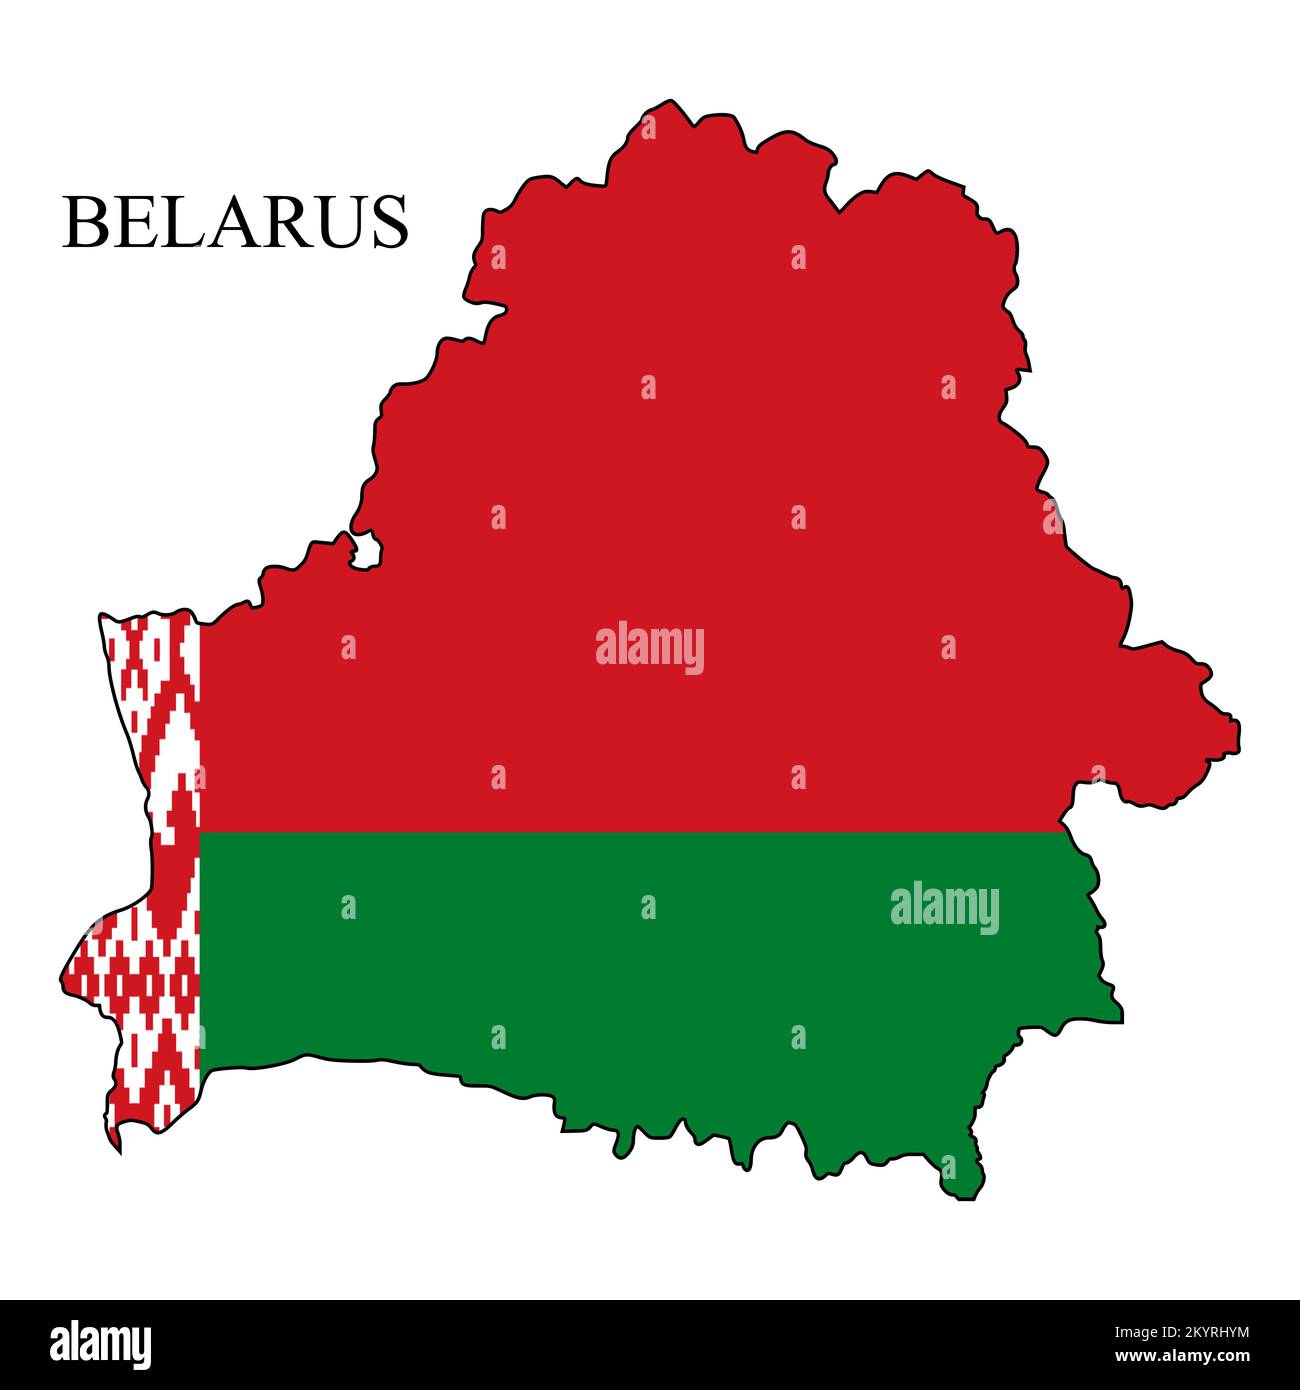 Belarus map vector illustration. Global economy. Famous country. Eastern Europe. Europe. Stock Vector